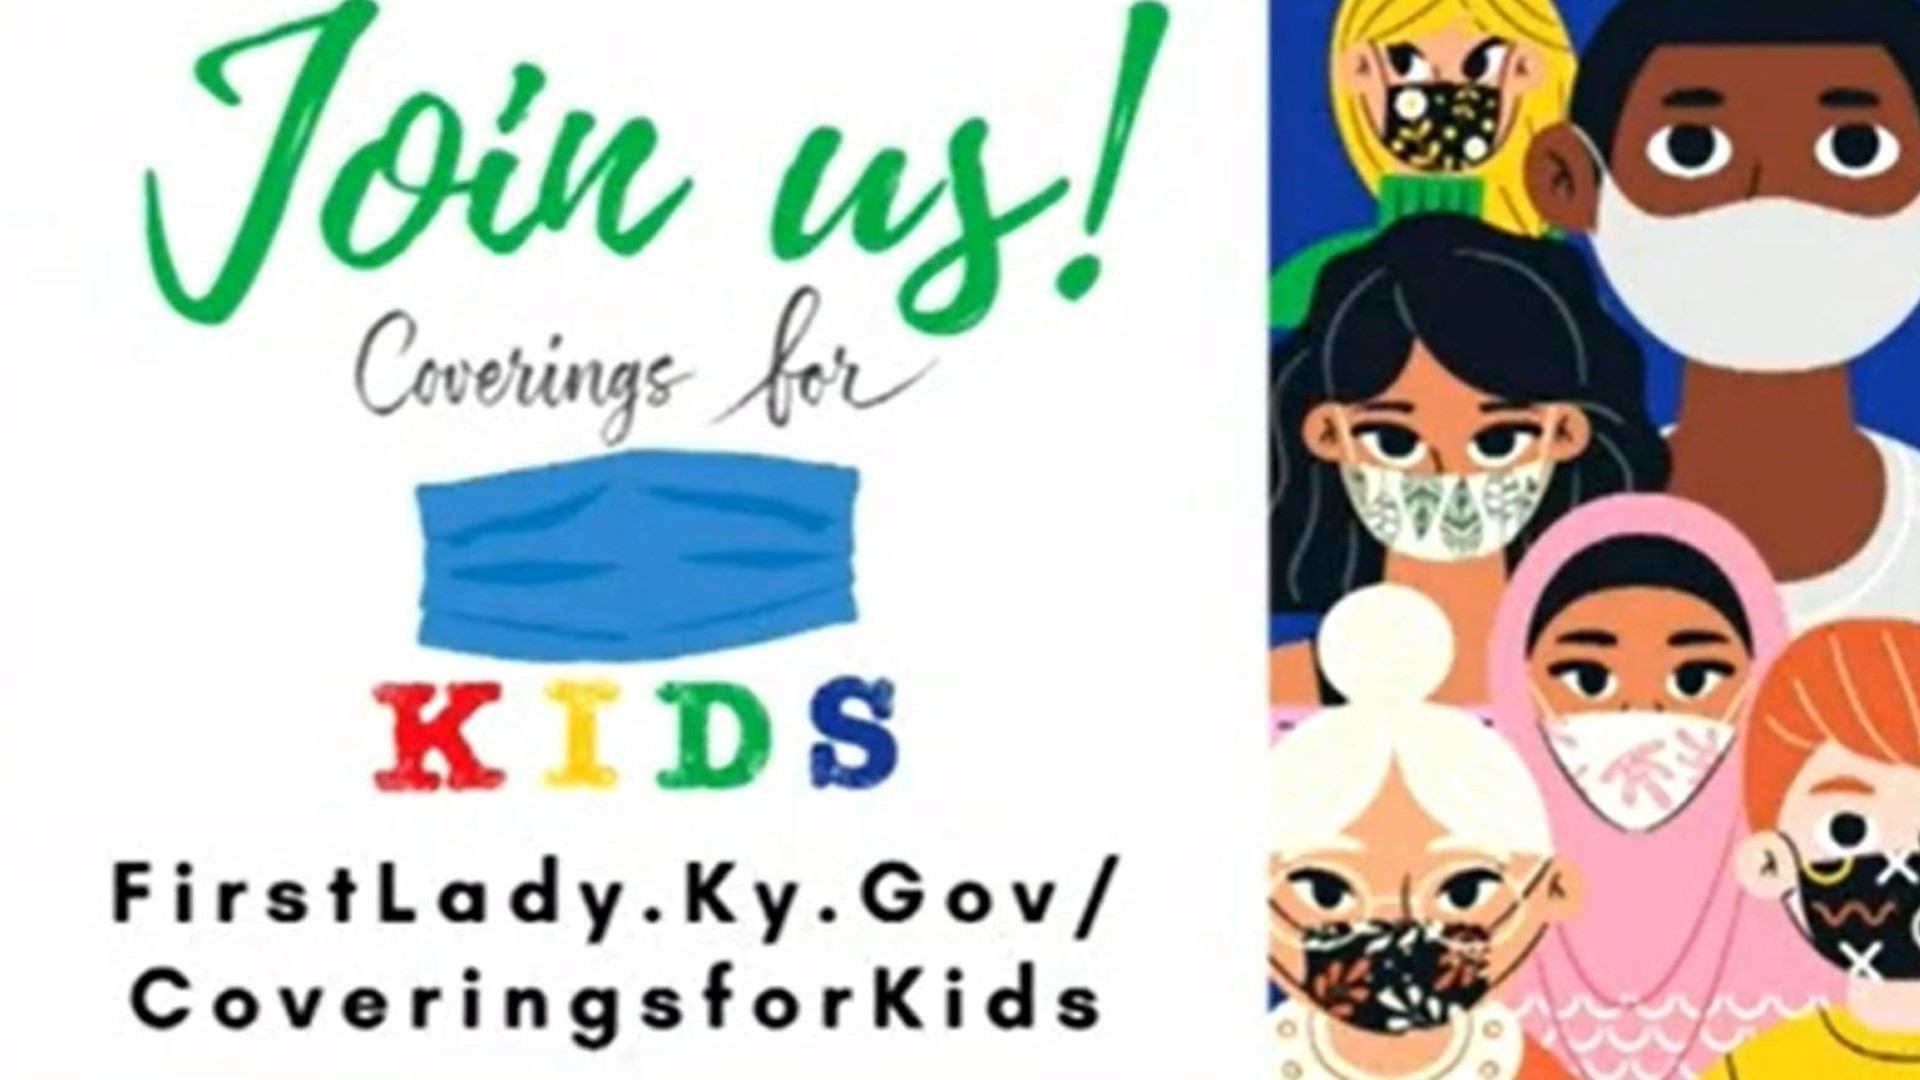 First Lady Britainy Beshear on Tuesday launched a new program, Coverings for Kids. Kentuckians can donate facial coverings directly to school districts.